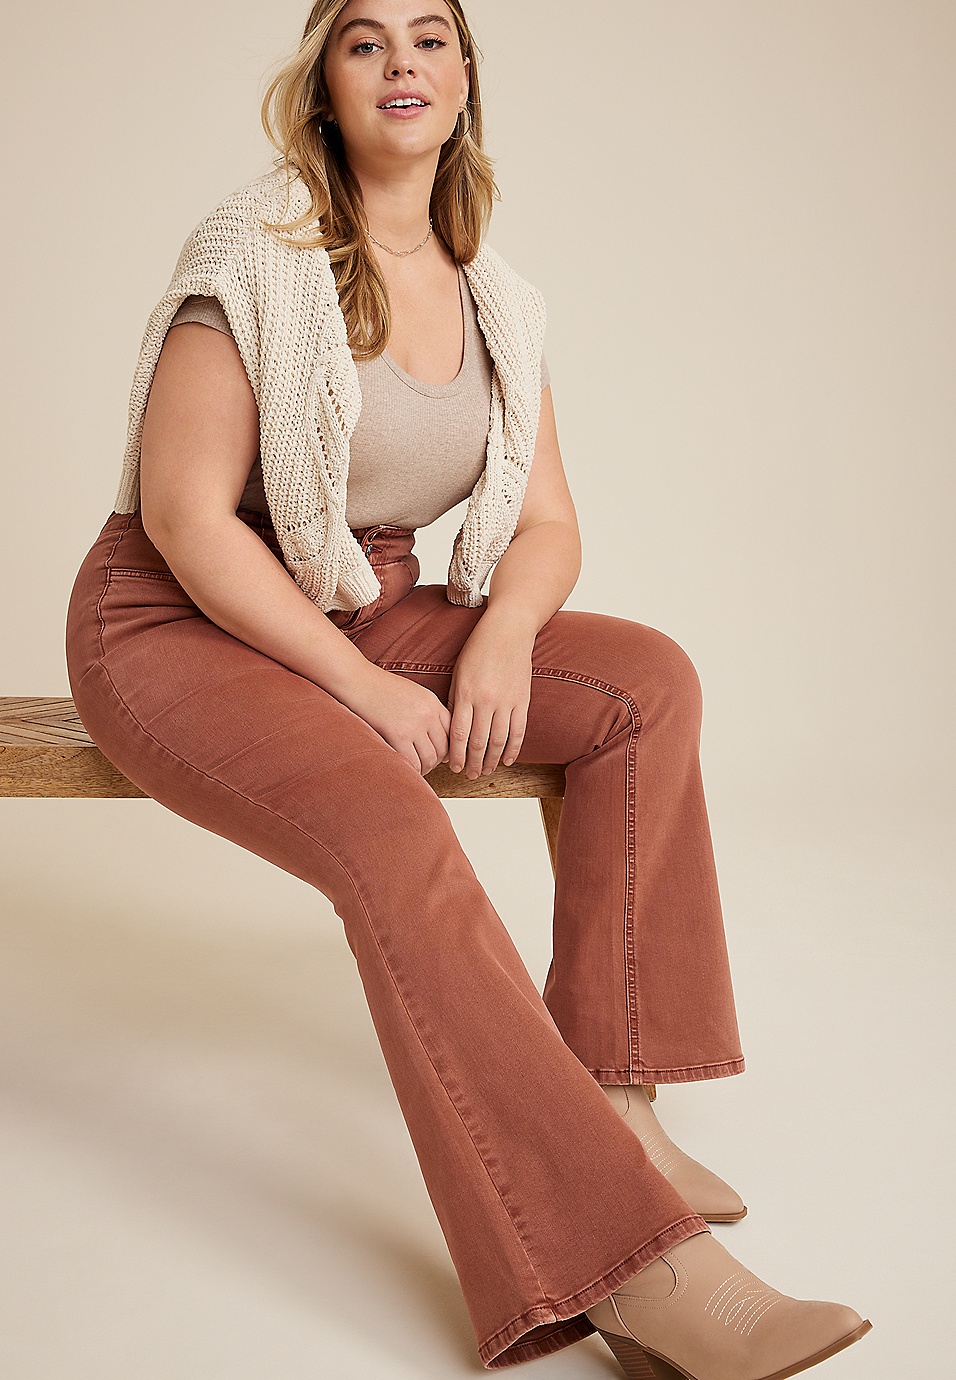 Plus-Size-Bell-Bottom-Jeans  Bell bottom jeans outfit, Plus size